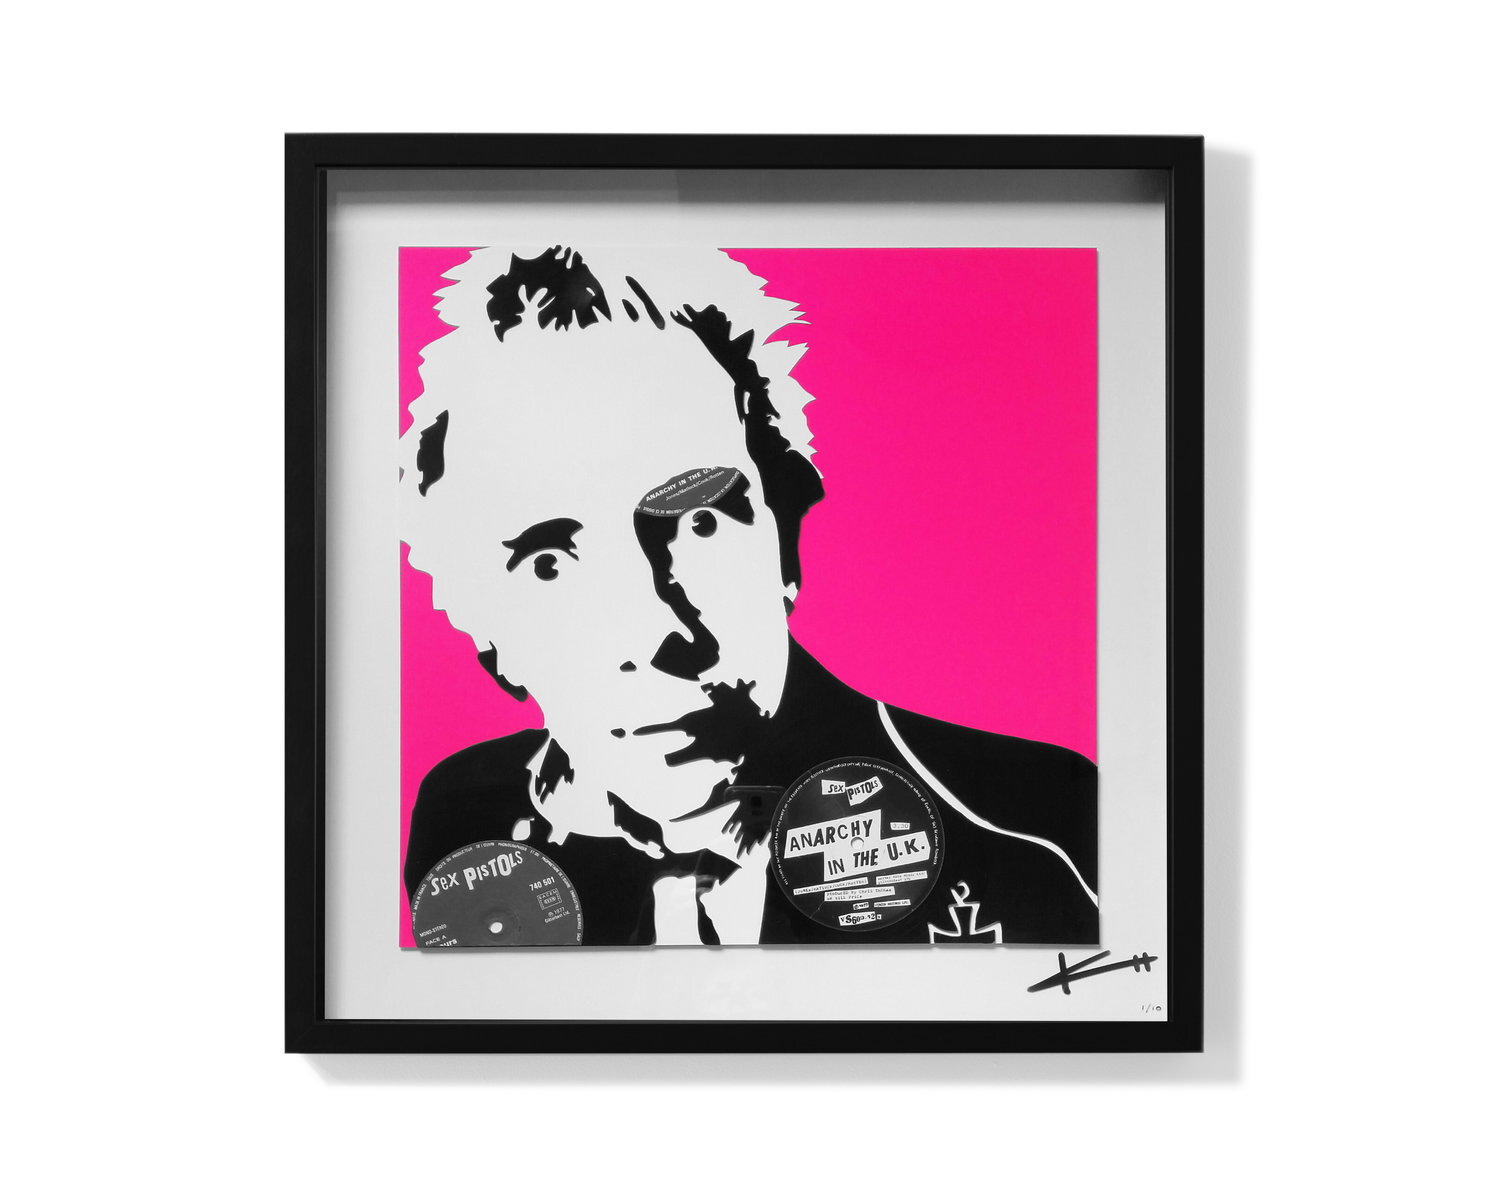 Johnny Rotten - Anarchy In The UK